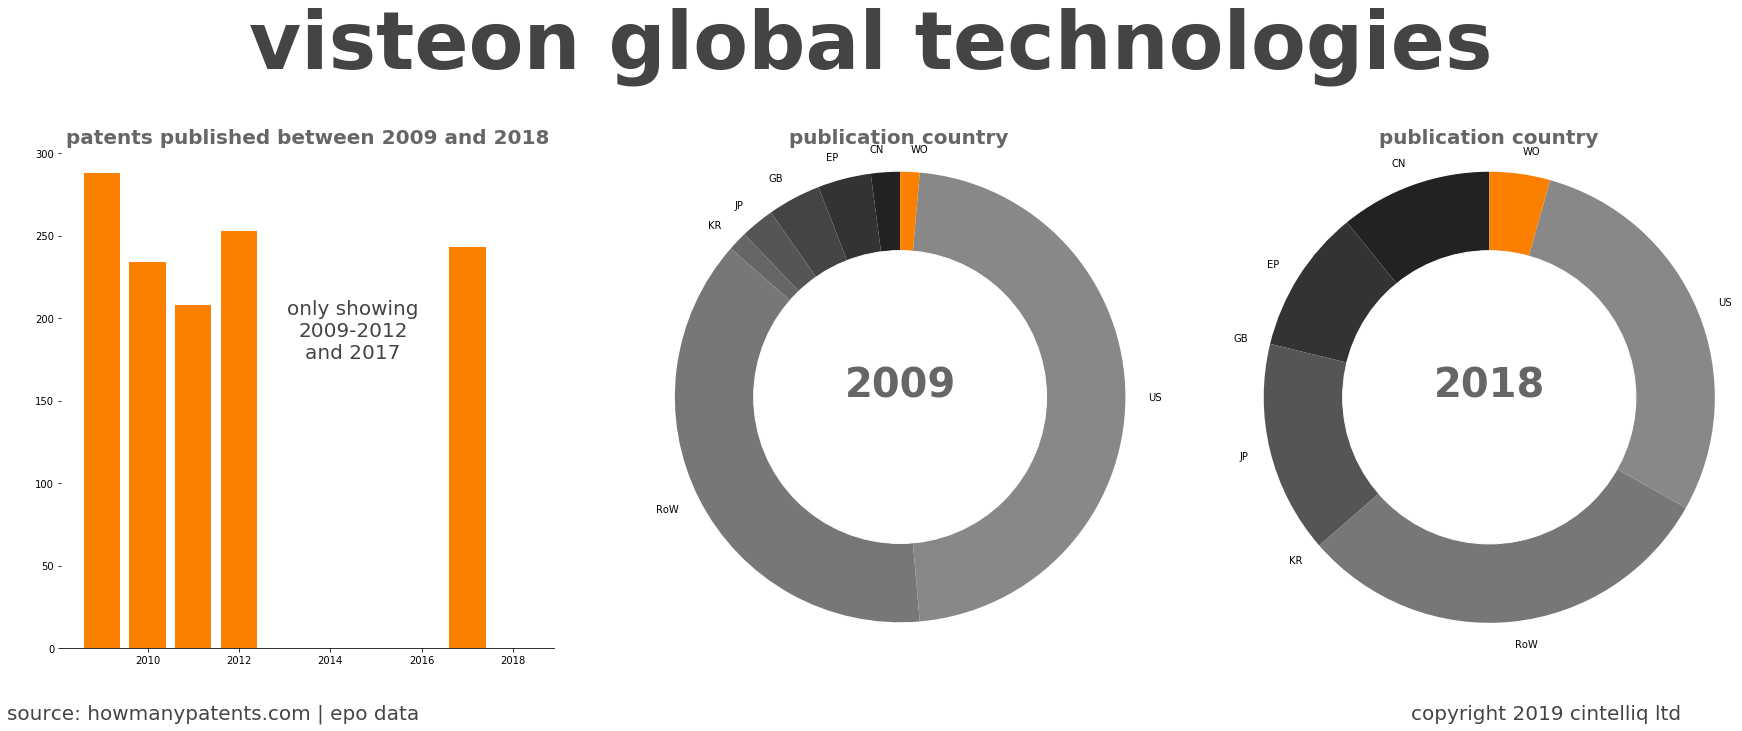 summary of patents for Visteon Global Technologies